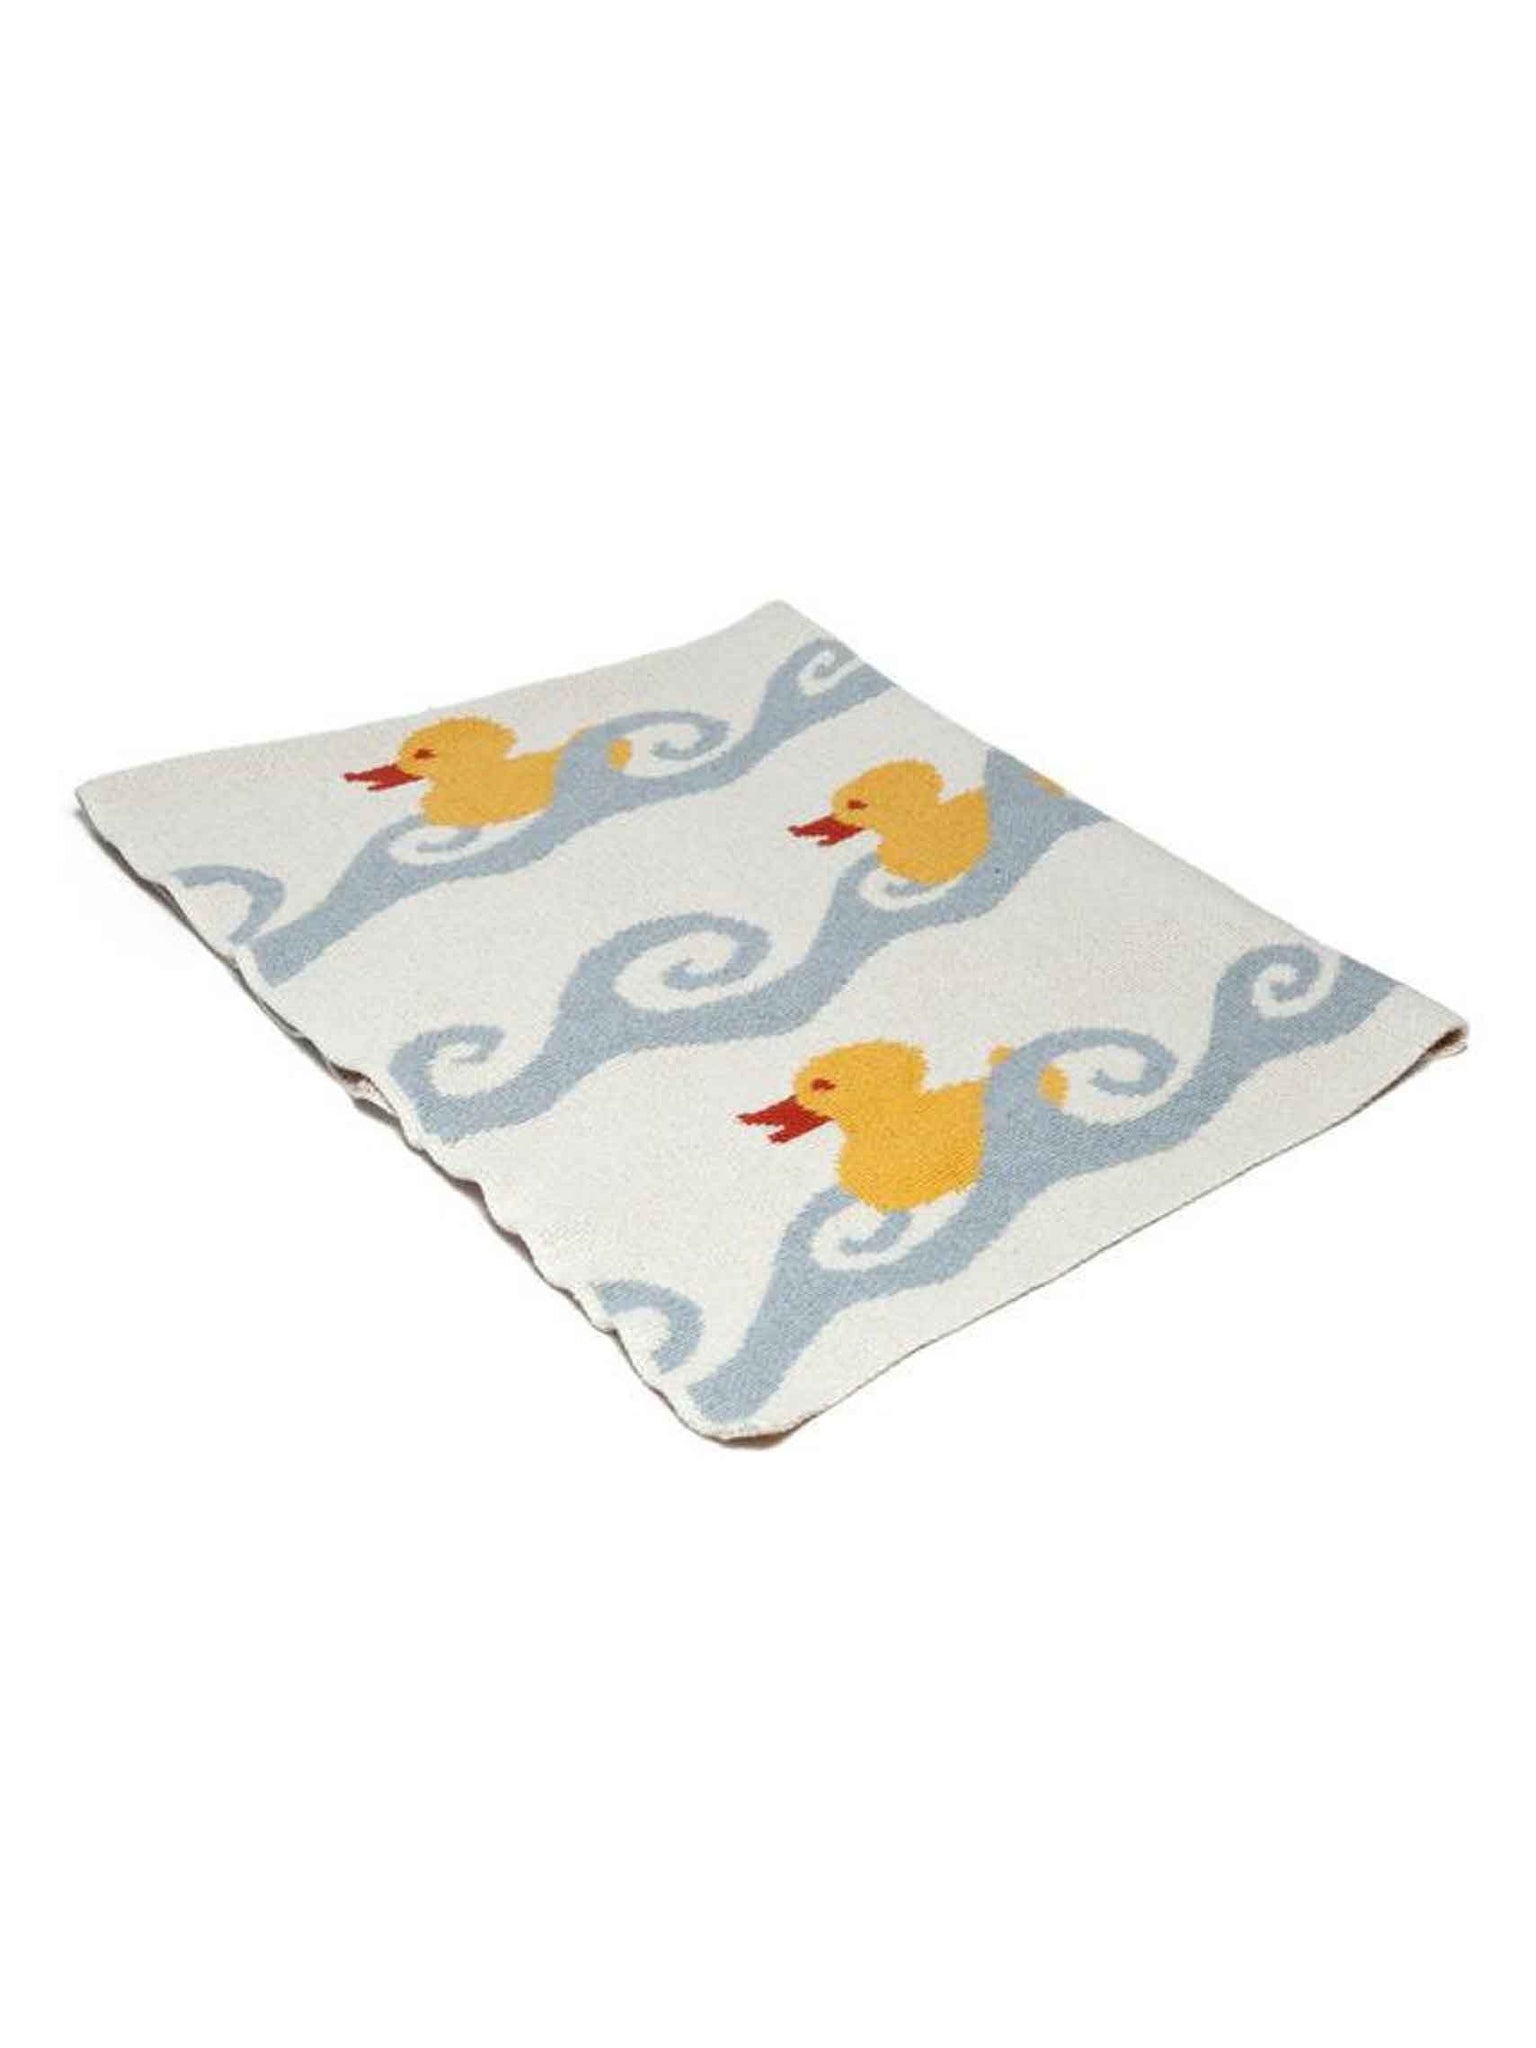 In2Green Eco Baby Ducky Personalized Blanket Weston Table